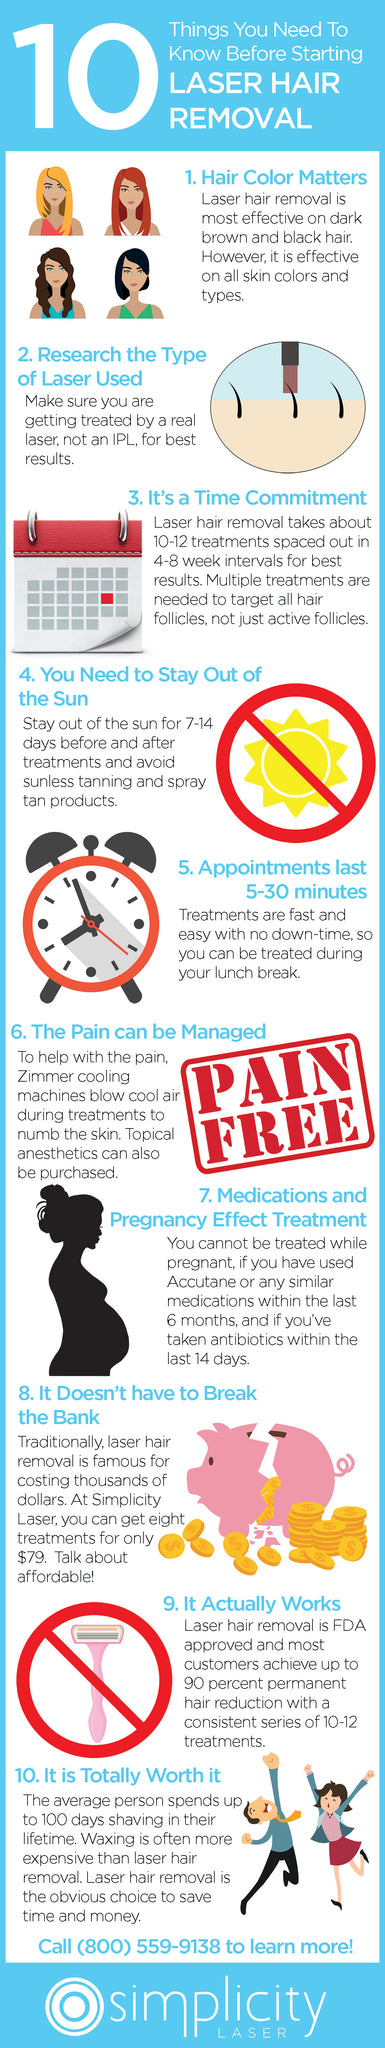 Laser Hair Removal Infographic